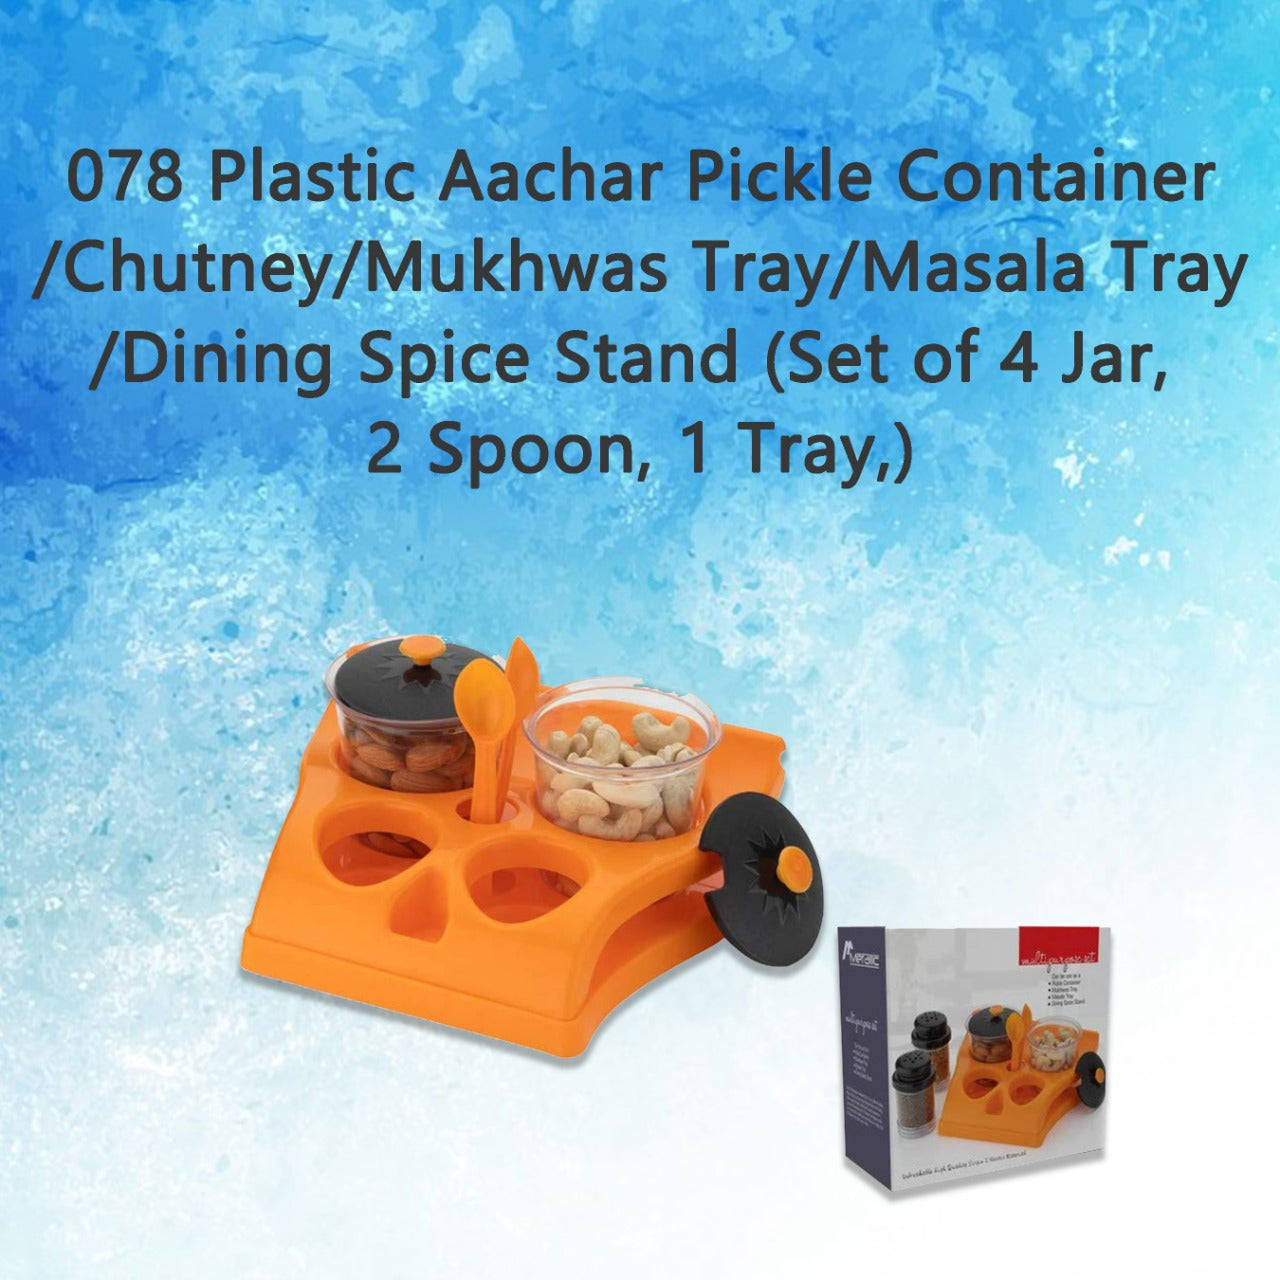 078 Plastic Aachar Pickle Container/Chutney/Mukhwas Tray/Masala Tray/Dining Spice Stand (Set of 4 Jar, 2 Spoon, 1 Tray,) Dukandaily